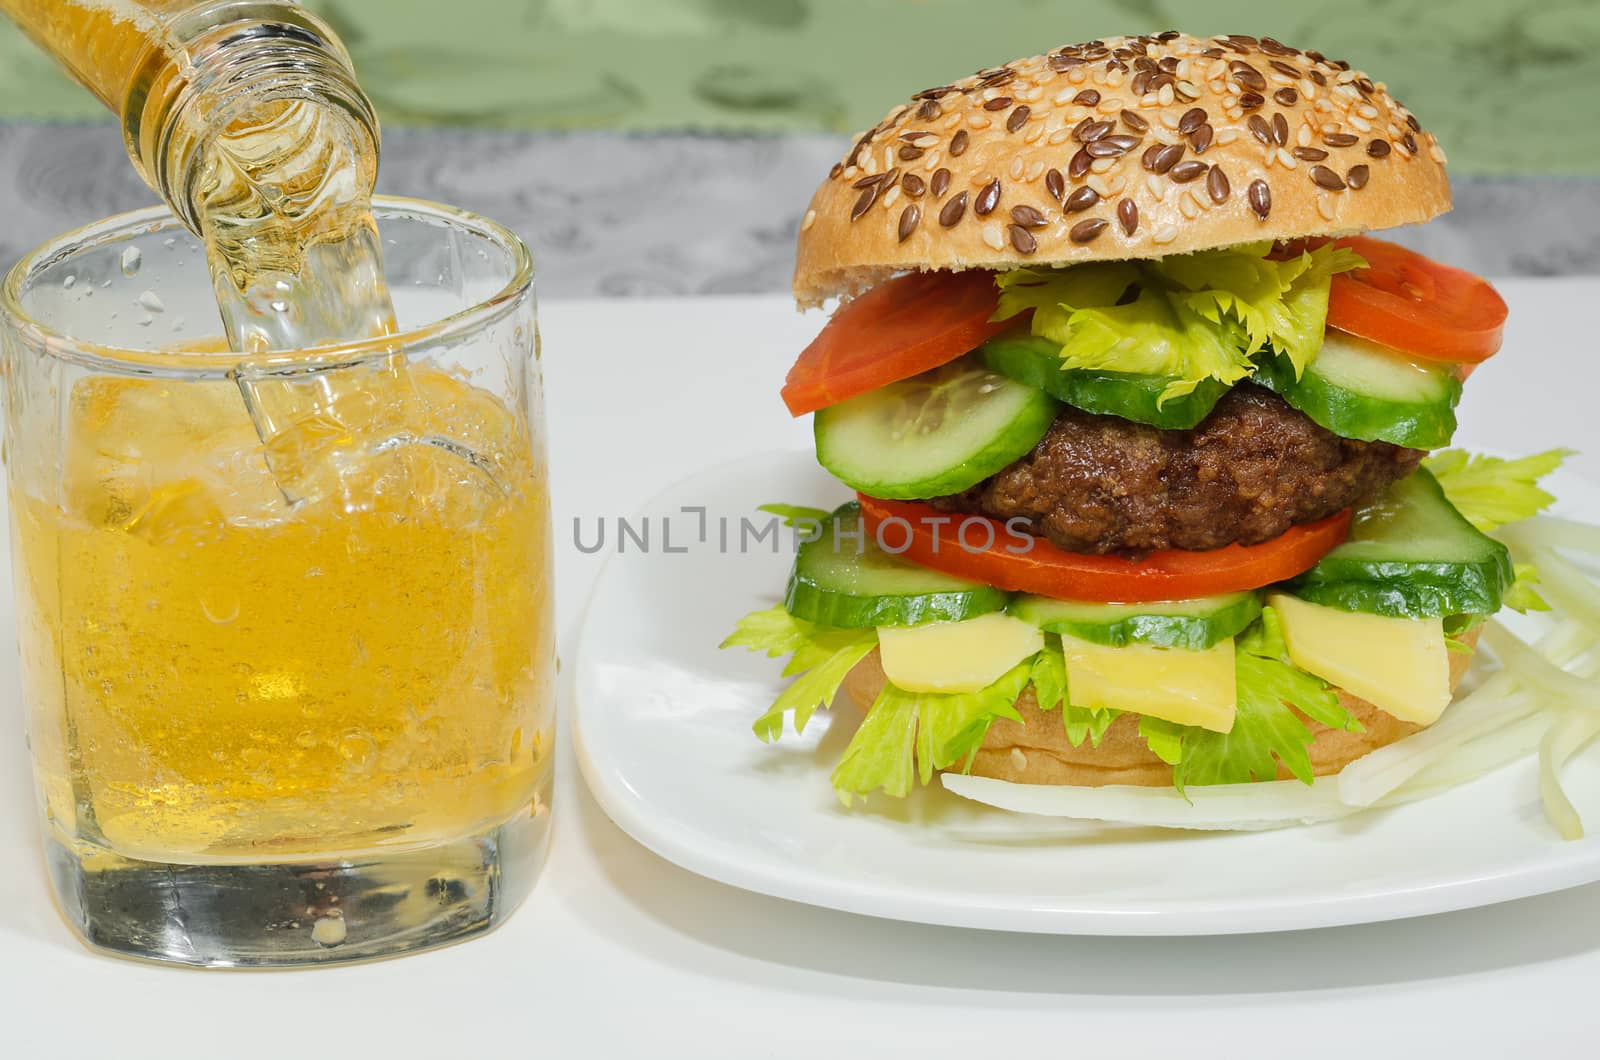 Great Burger and beer is poured into a glass close-up.